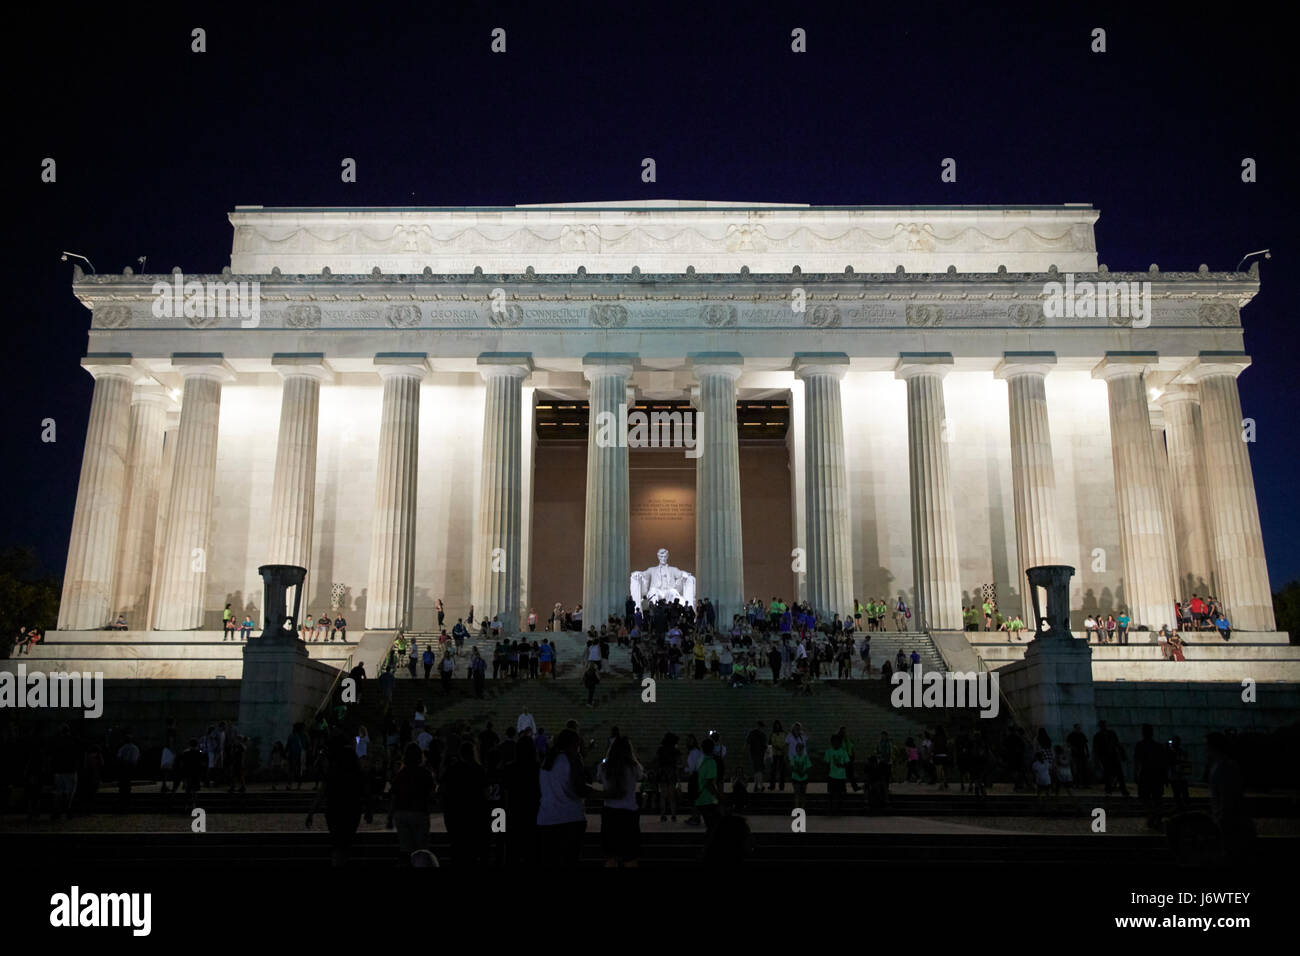 crowds outside the lincoln memorial at night Washington DC USA Stock Photo